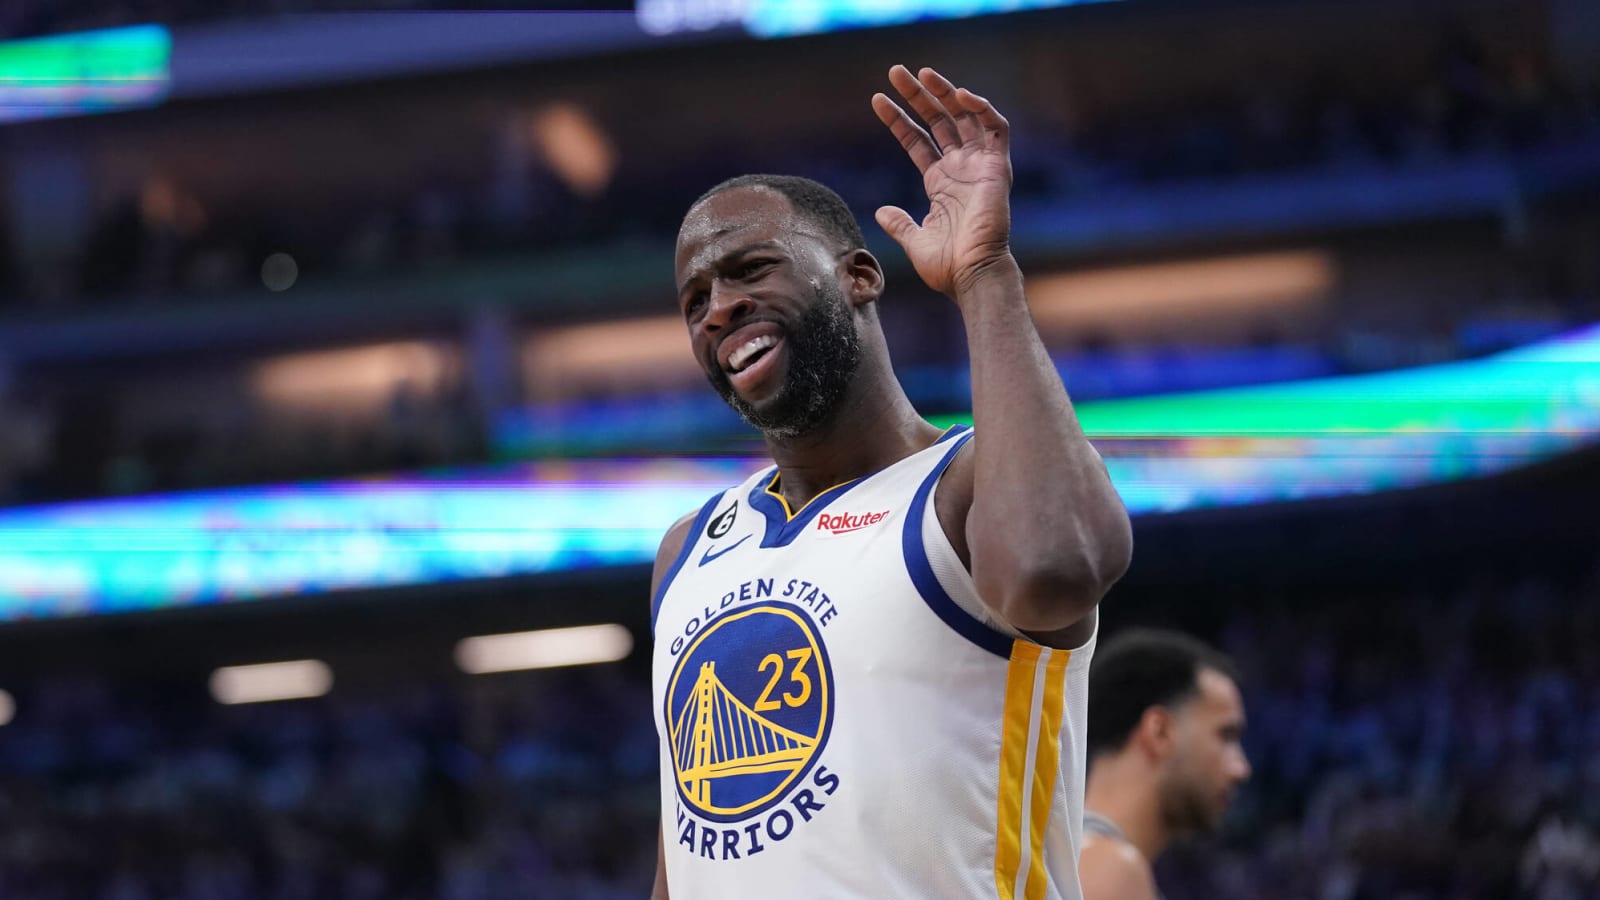 Watch: Draymond Green stomps Sabonis and gets ejected